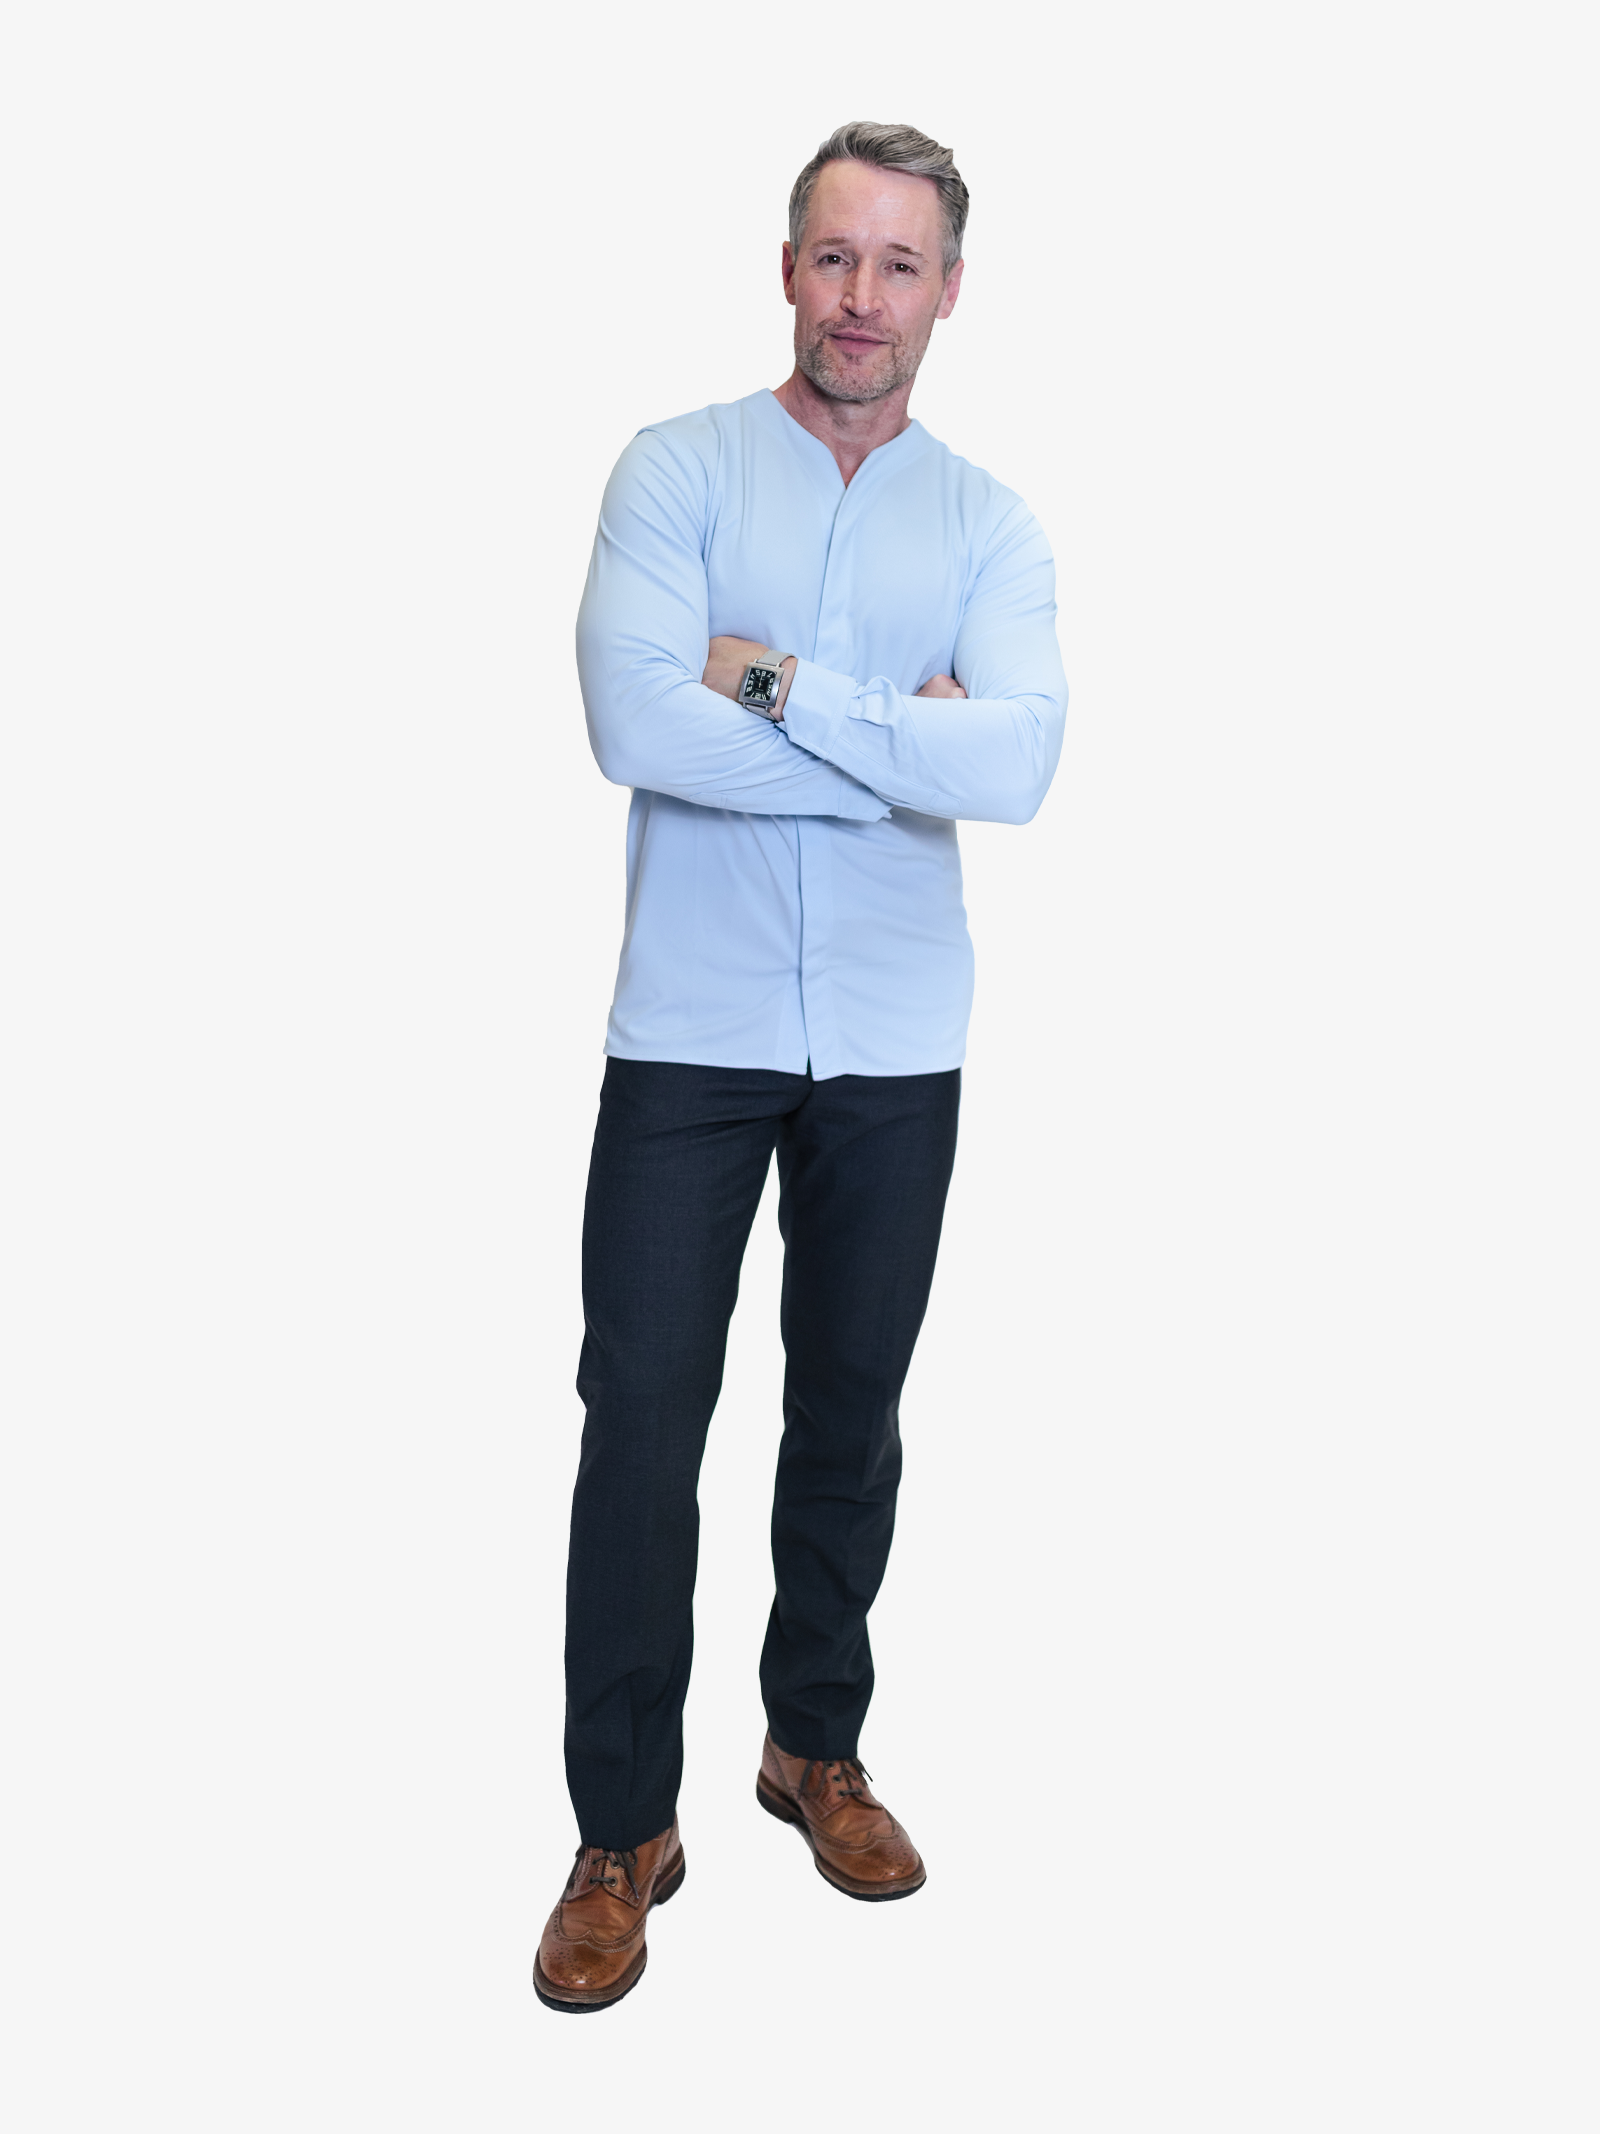 Man wearing a collarless button down in blue casually with a pair of dark slacks and brown shoes